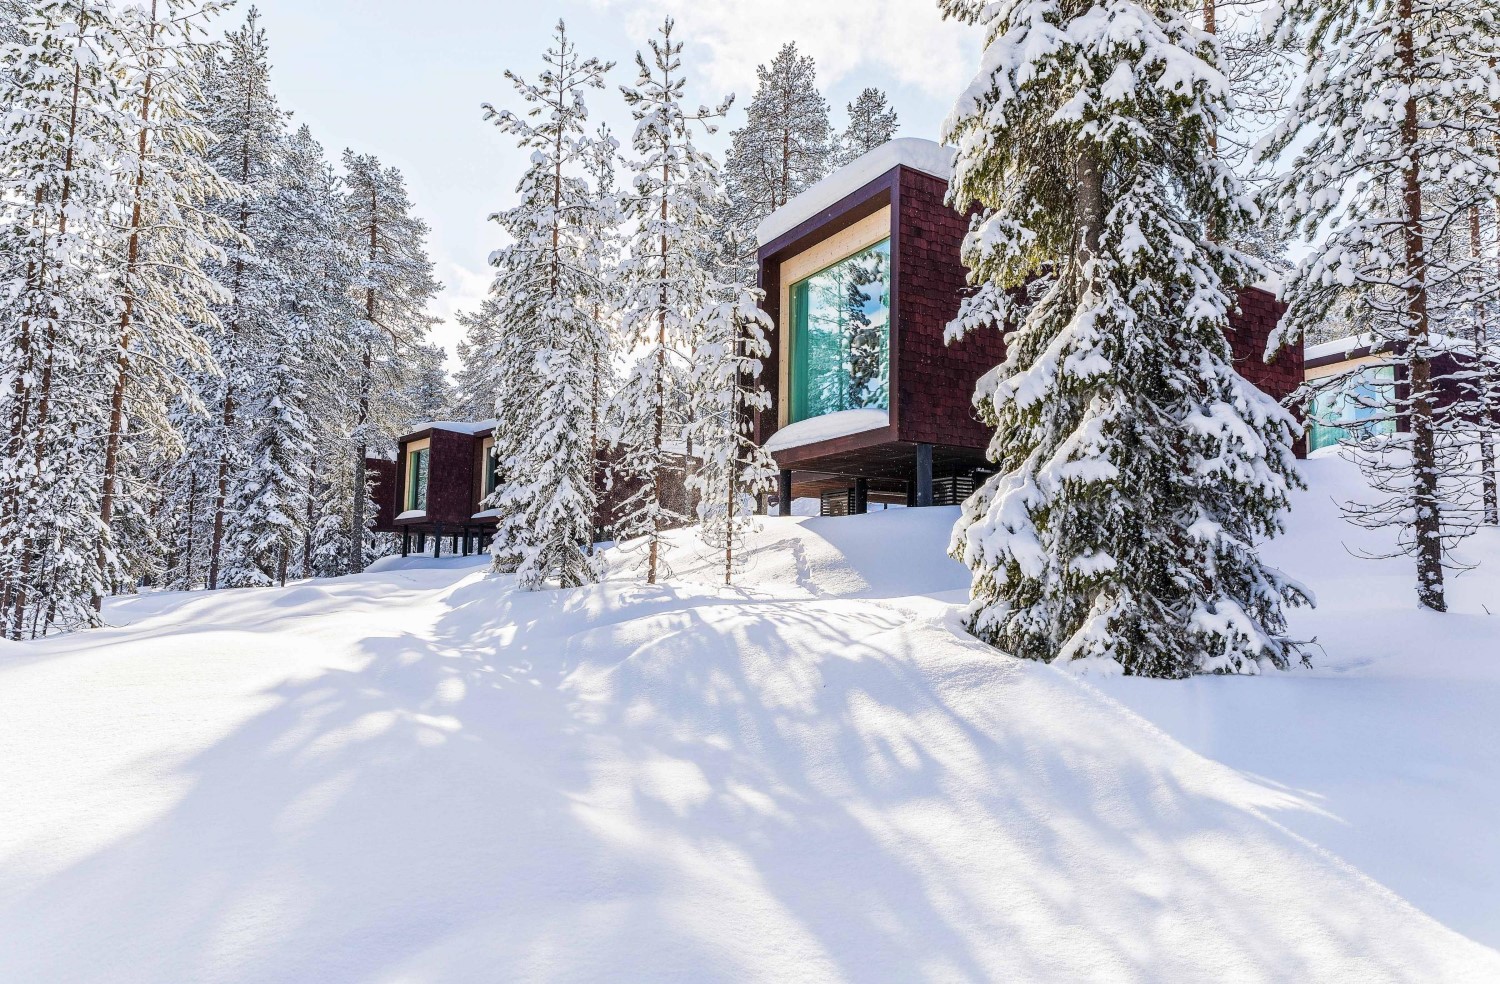 Artic TreeHouse Hotel in Finland, a Mr & Mrs Smith property.